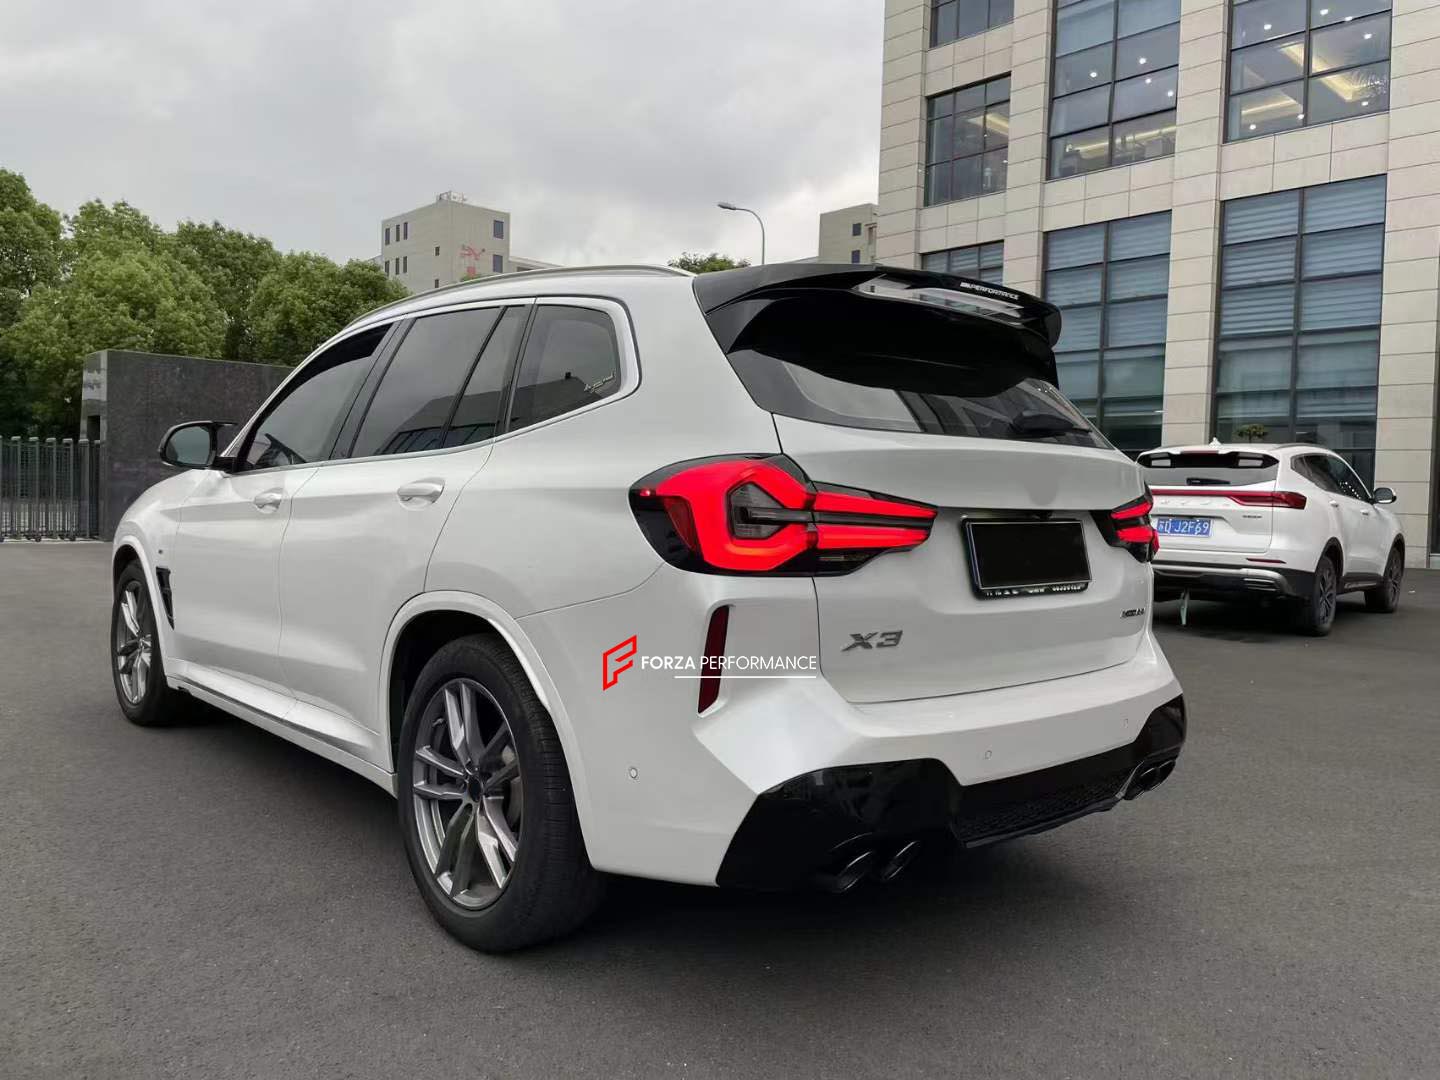 BMW X3 III (G01) [2017 .. 2021] - Wheel Fitment Data and Specs for Europe